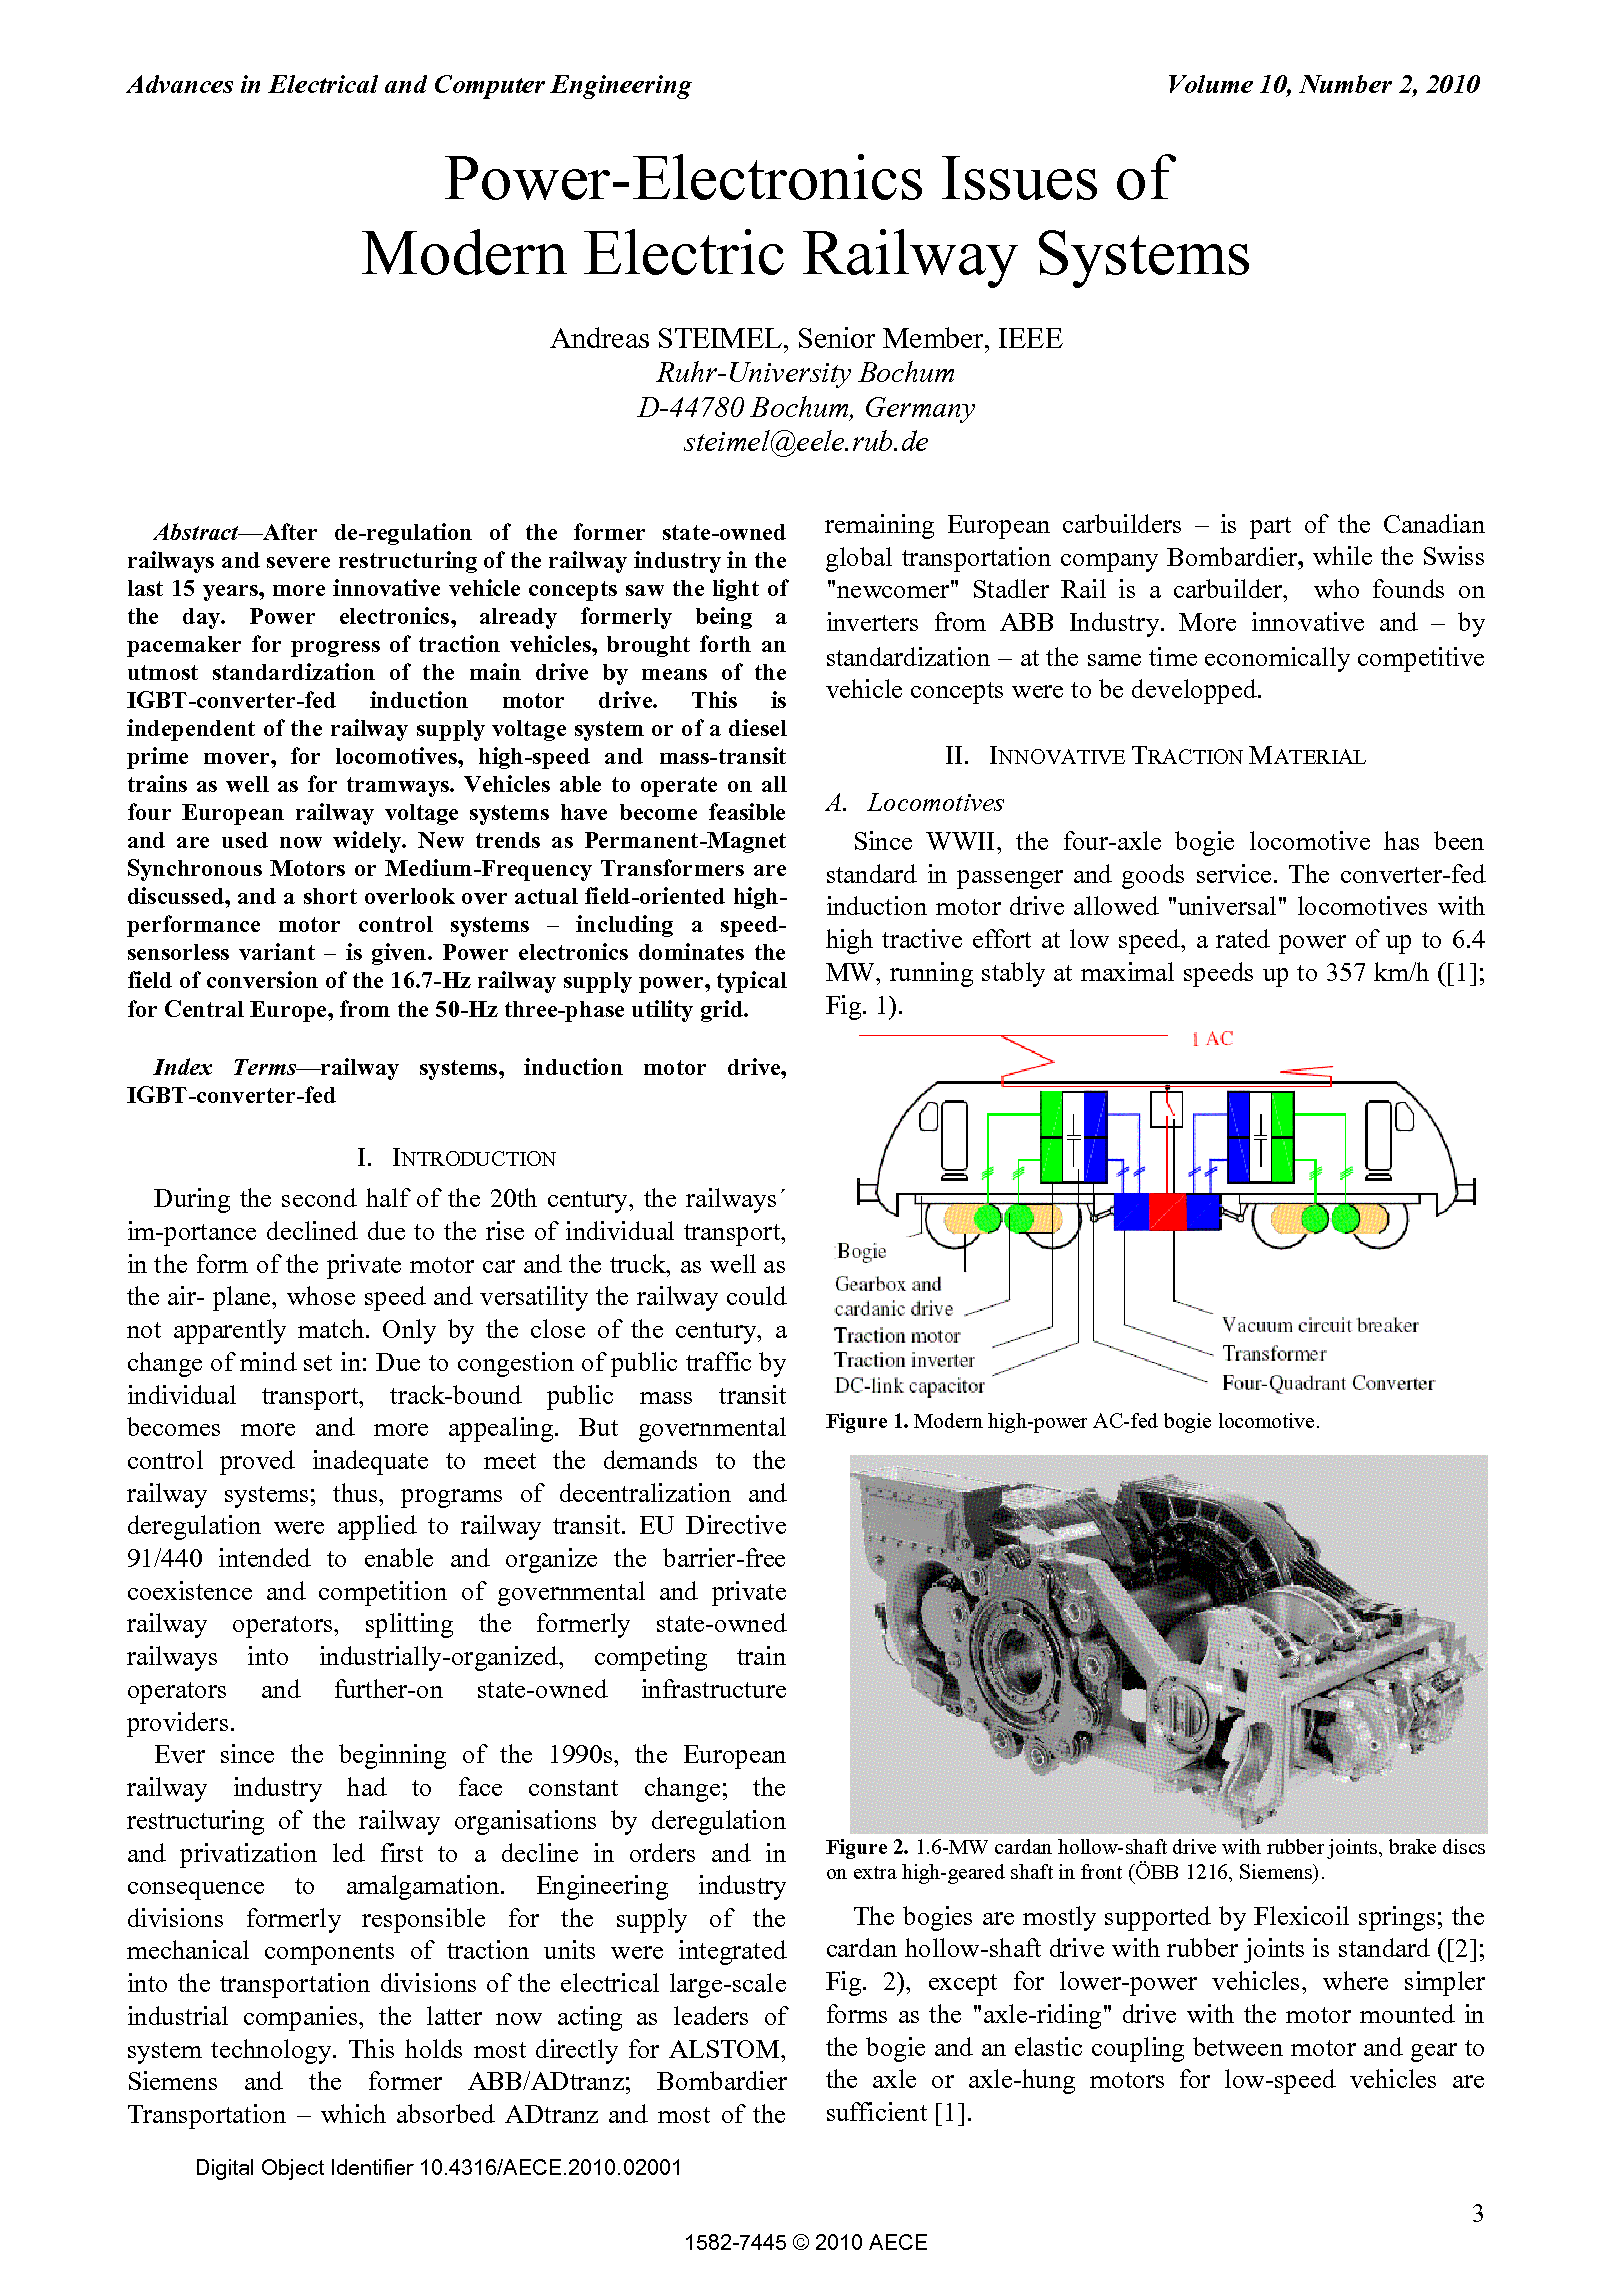 PDF Quickview for paper with DOI:10.4316/AECE.2010.02001